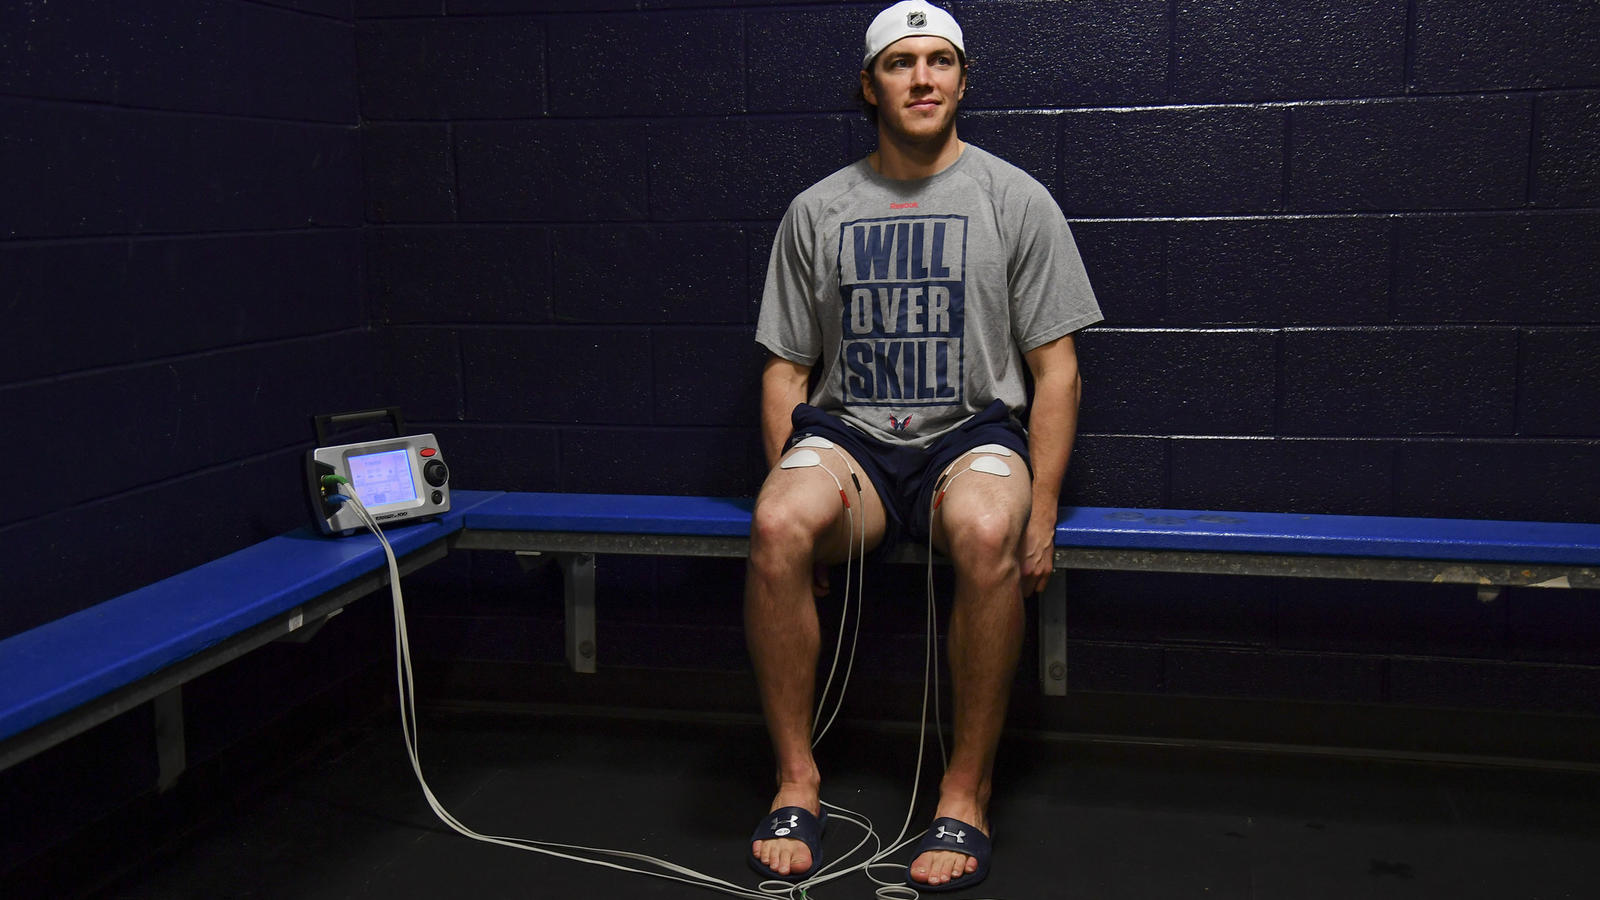 ‘Shock value’: T.J. Oshie one of roughly 75 NHL players who use electricity to stay in shape